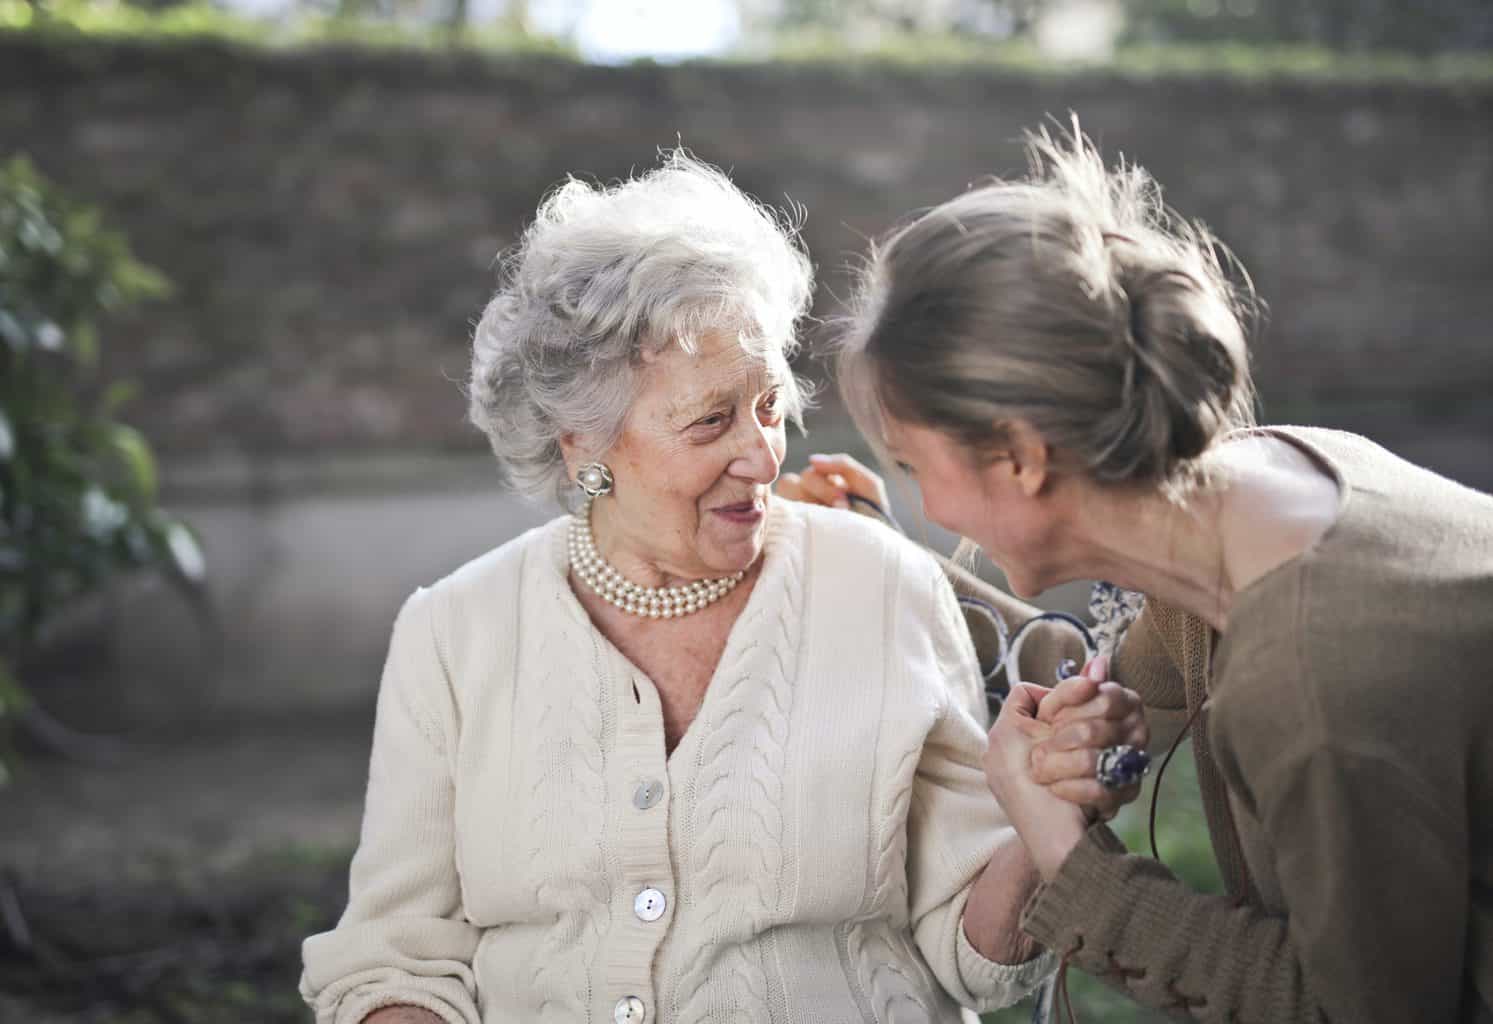 7 tips to minimise COVID-19 risk for elderly parents